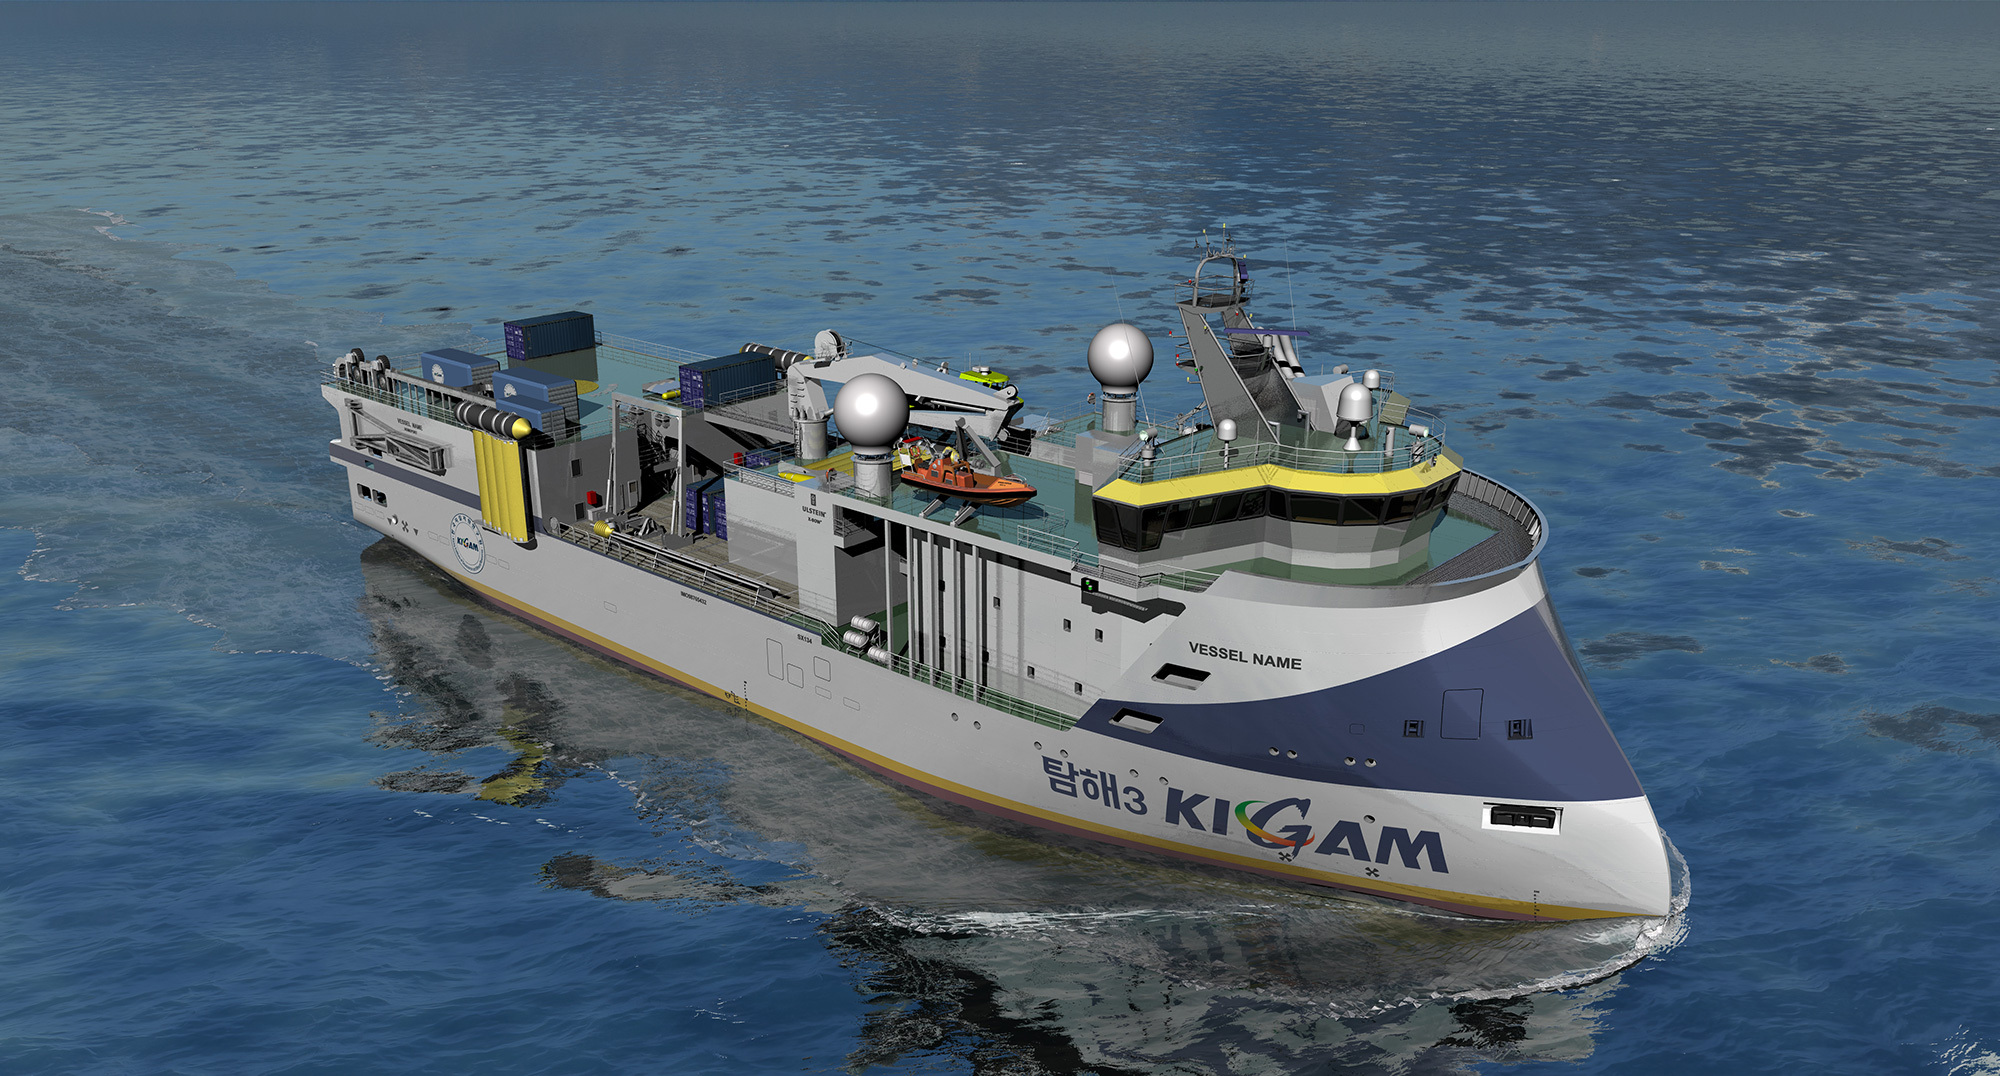 A new research vessel for KIGAM.